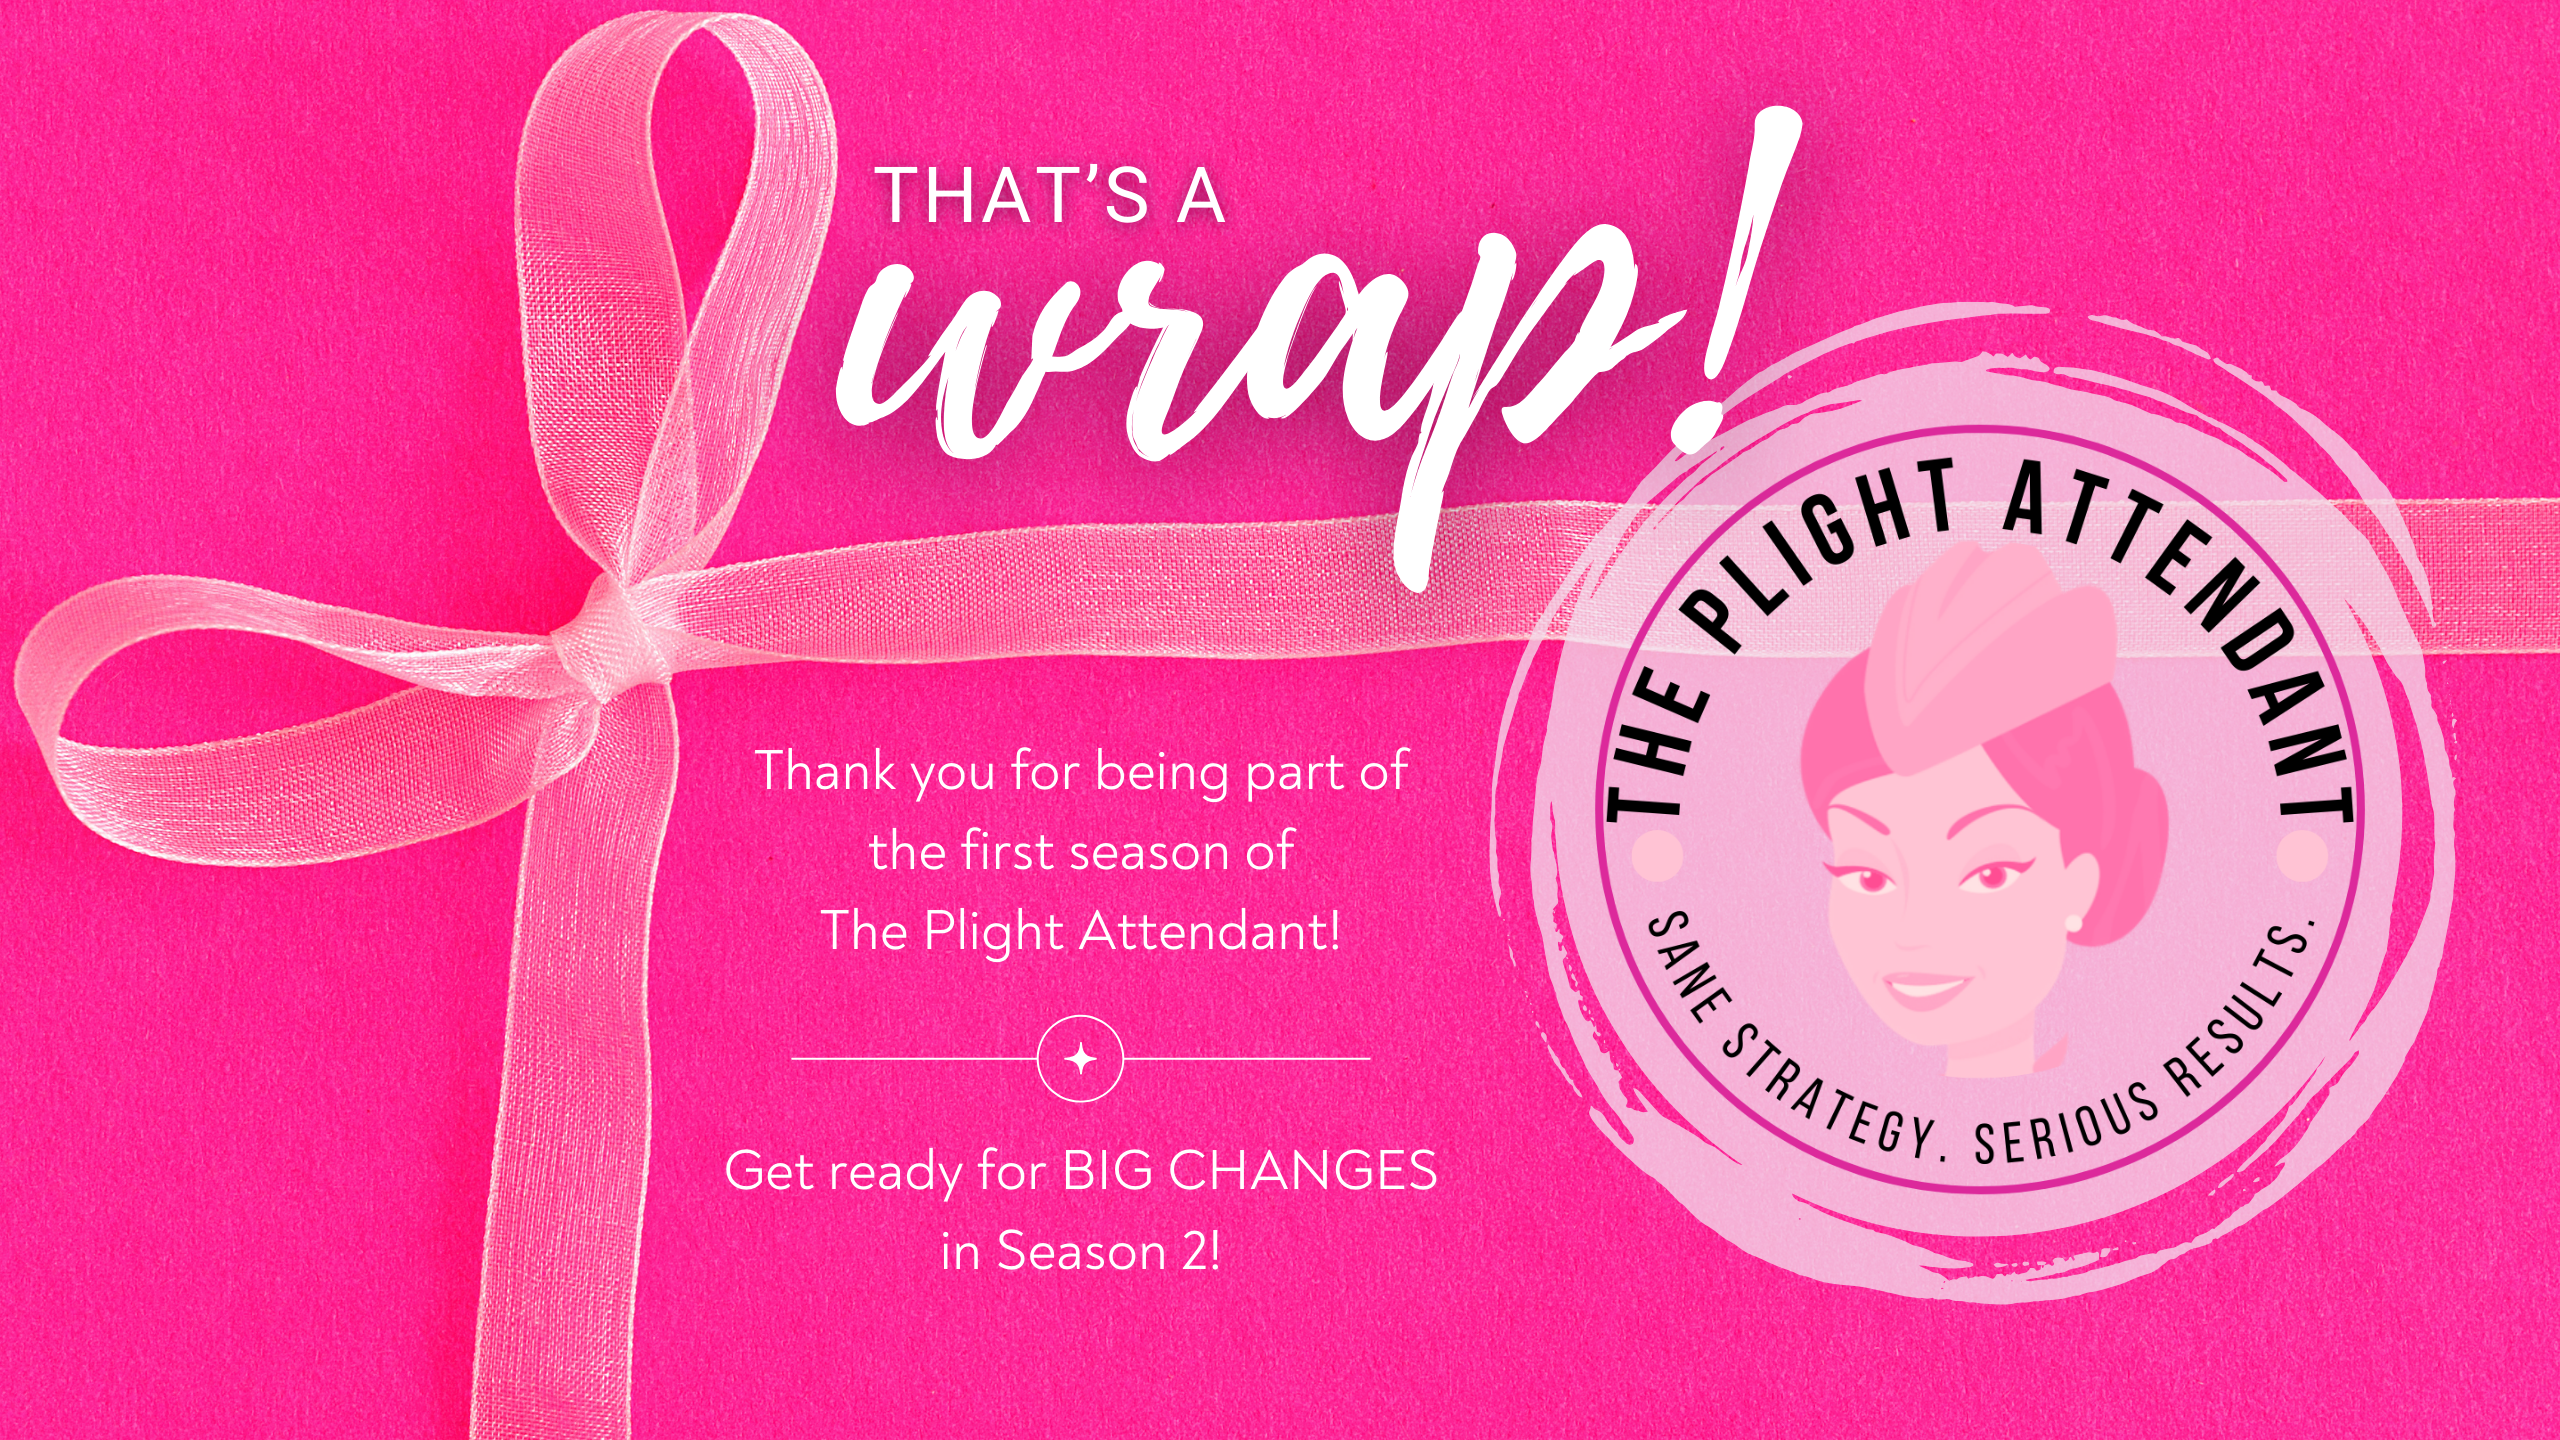 end of Season 1 of The Plight Attendant show